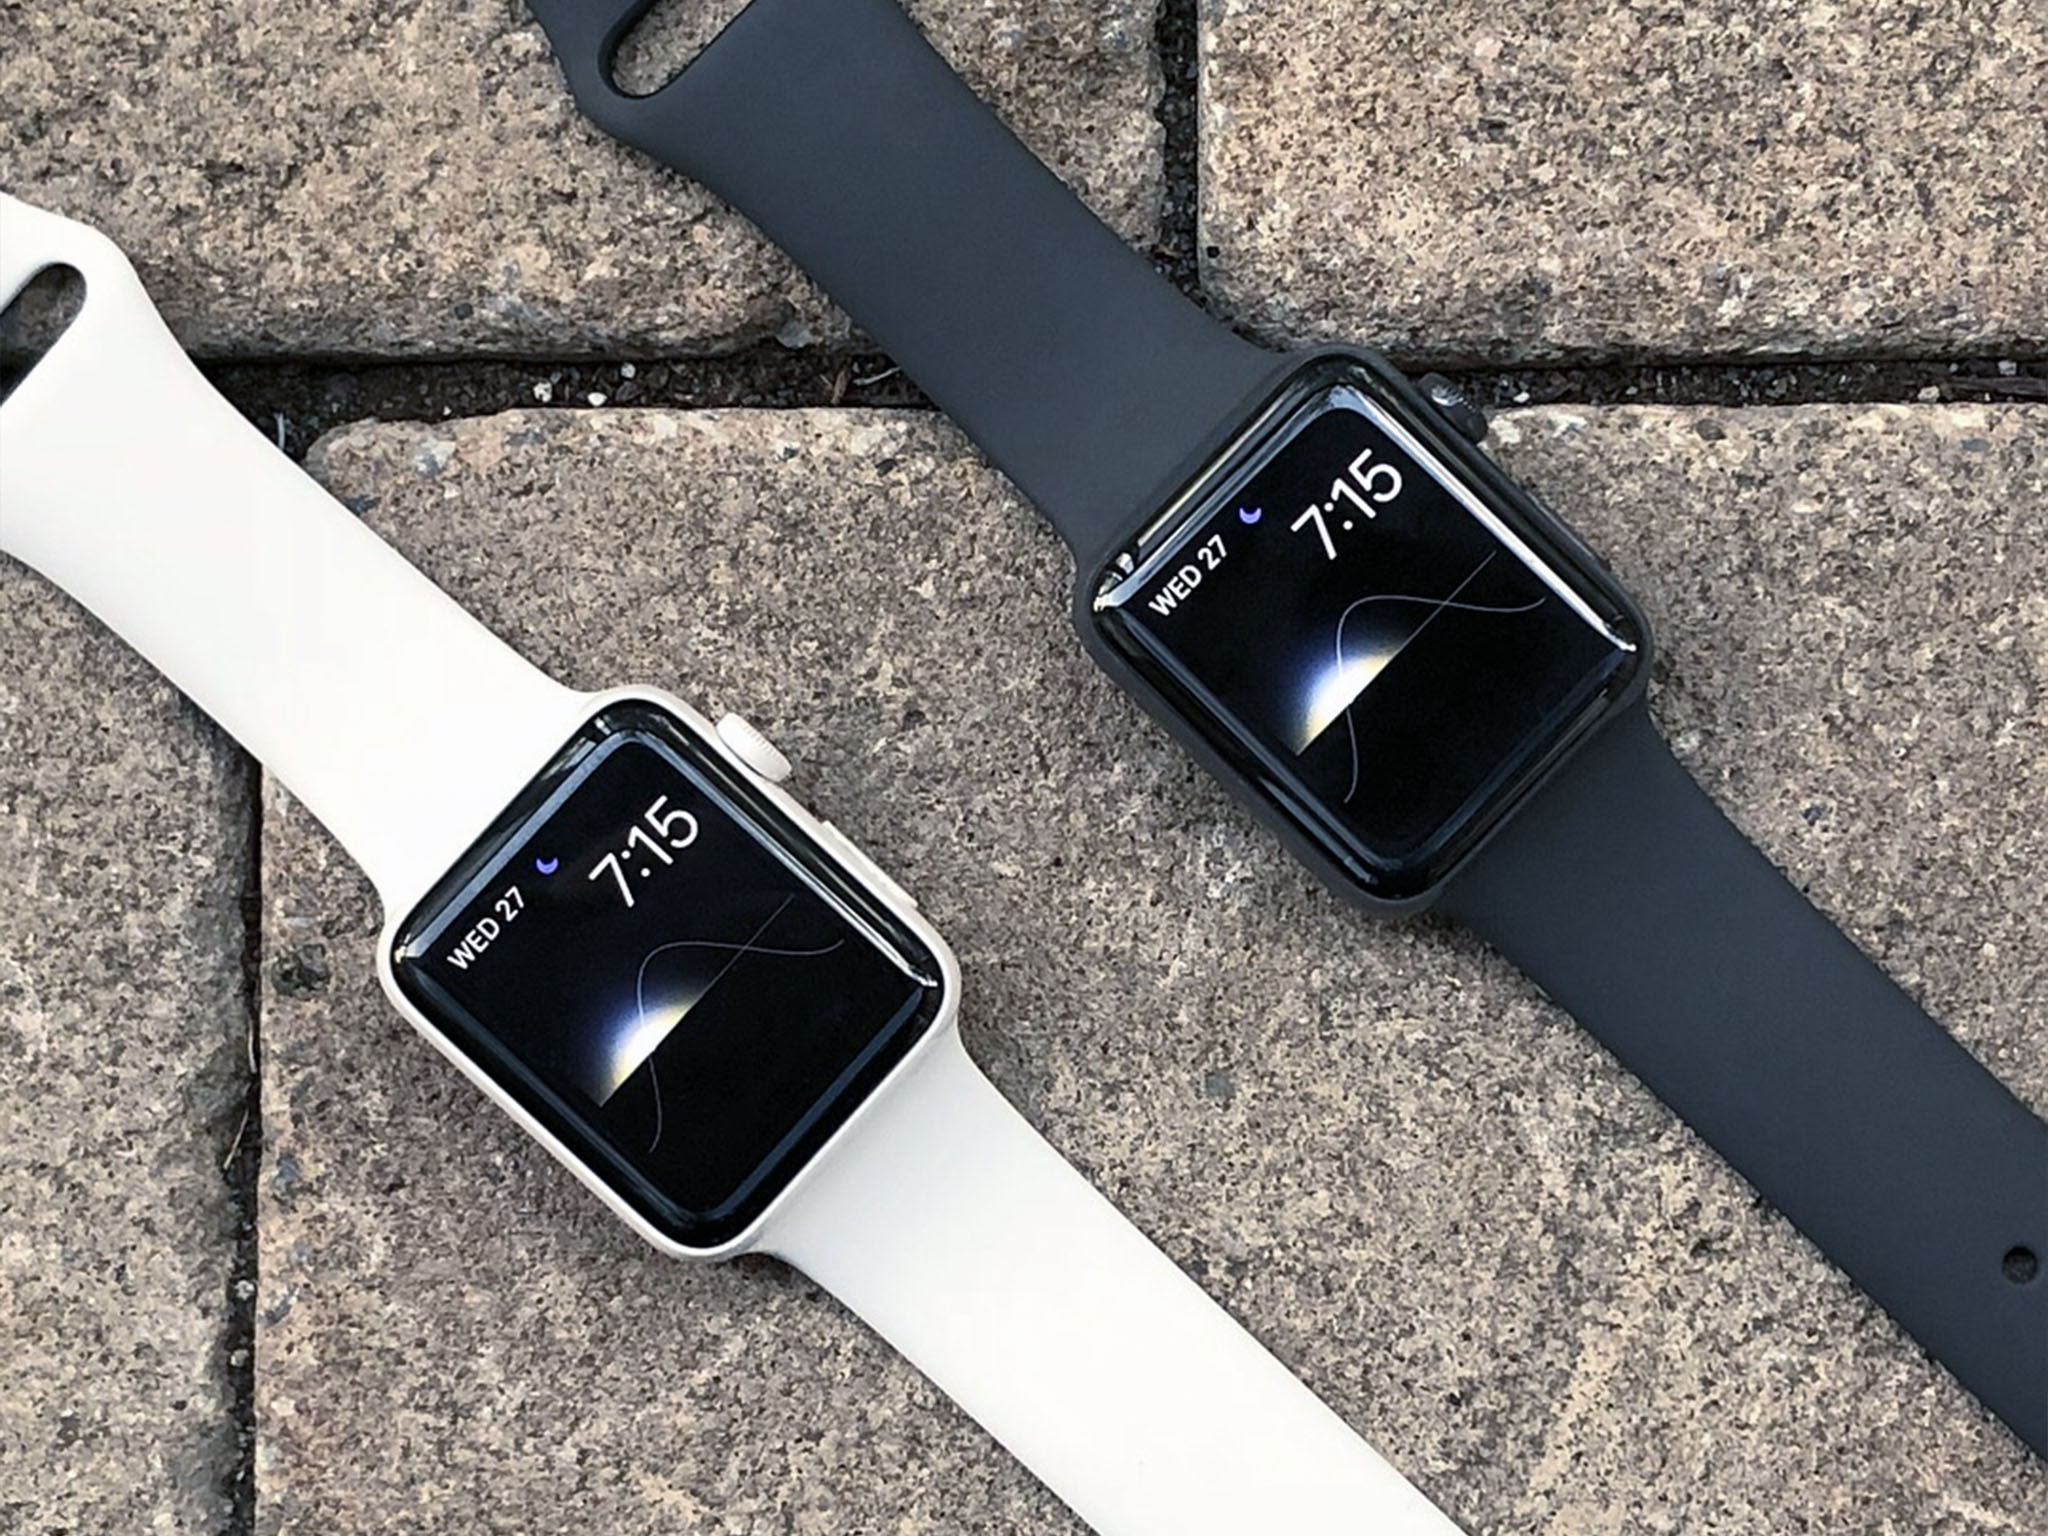 iwatch 3 space grey